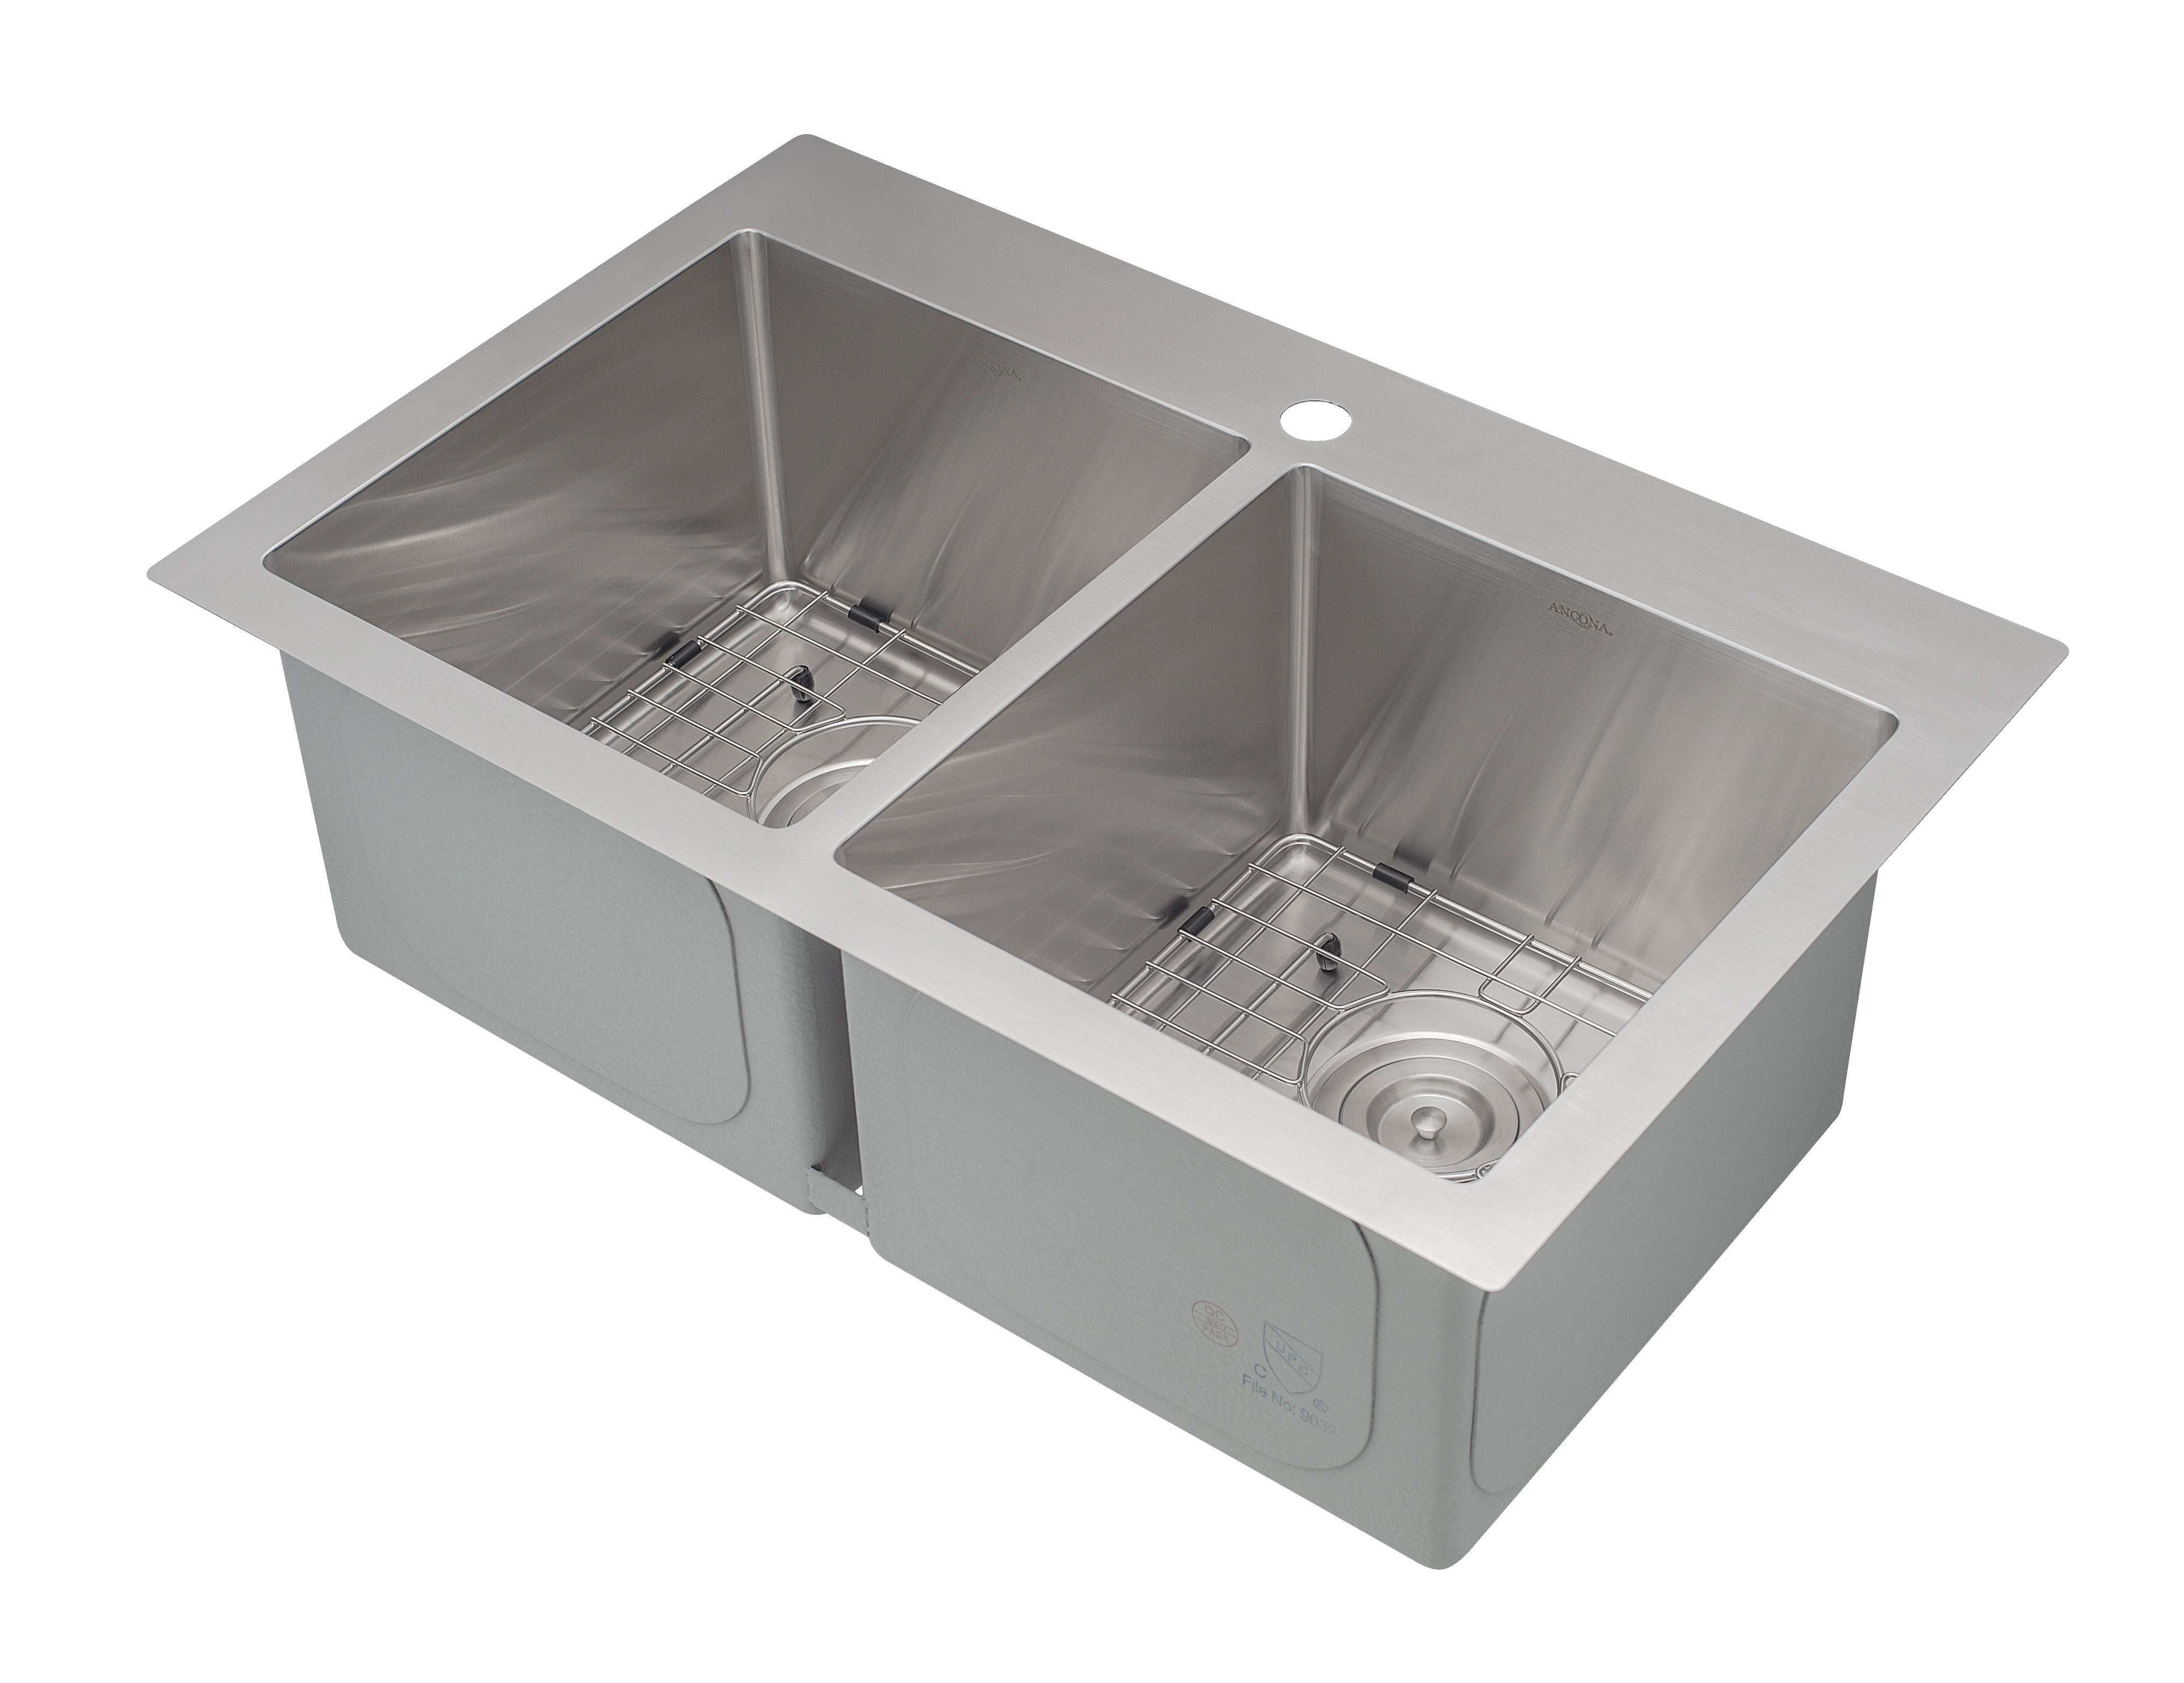 Prestige Series Drop-in Stainless Steel 30 in. 1-Hole 50/50 Double Bowl Kitchen Sink with Grids and Strainers